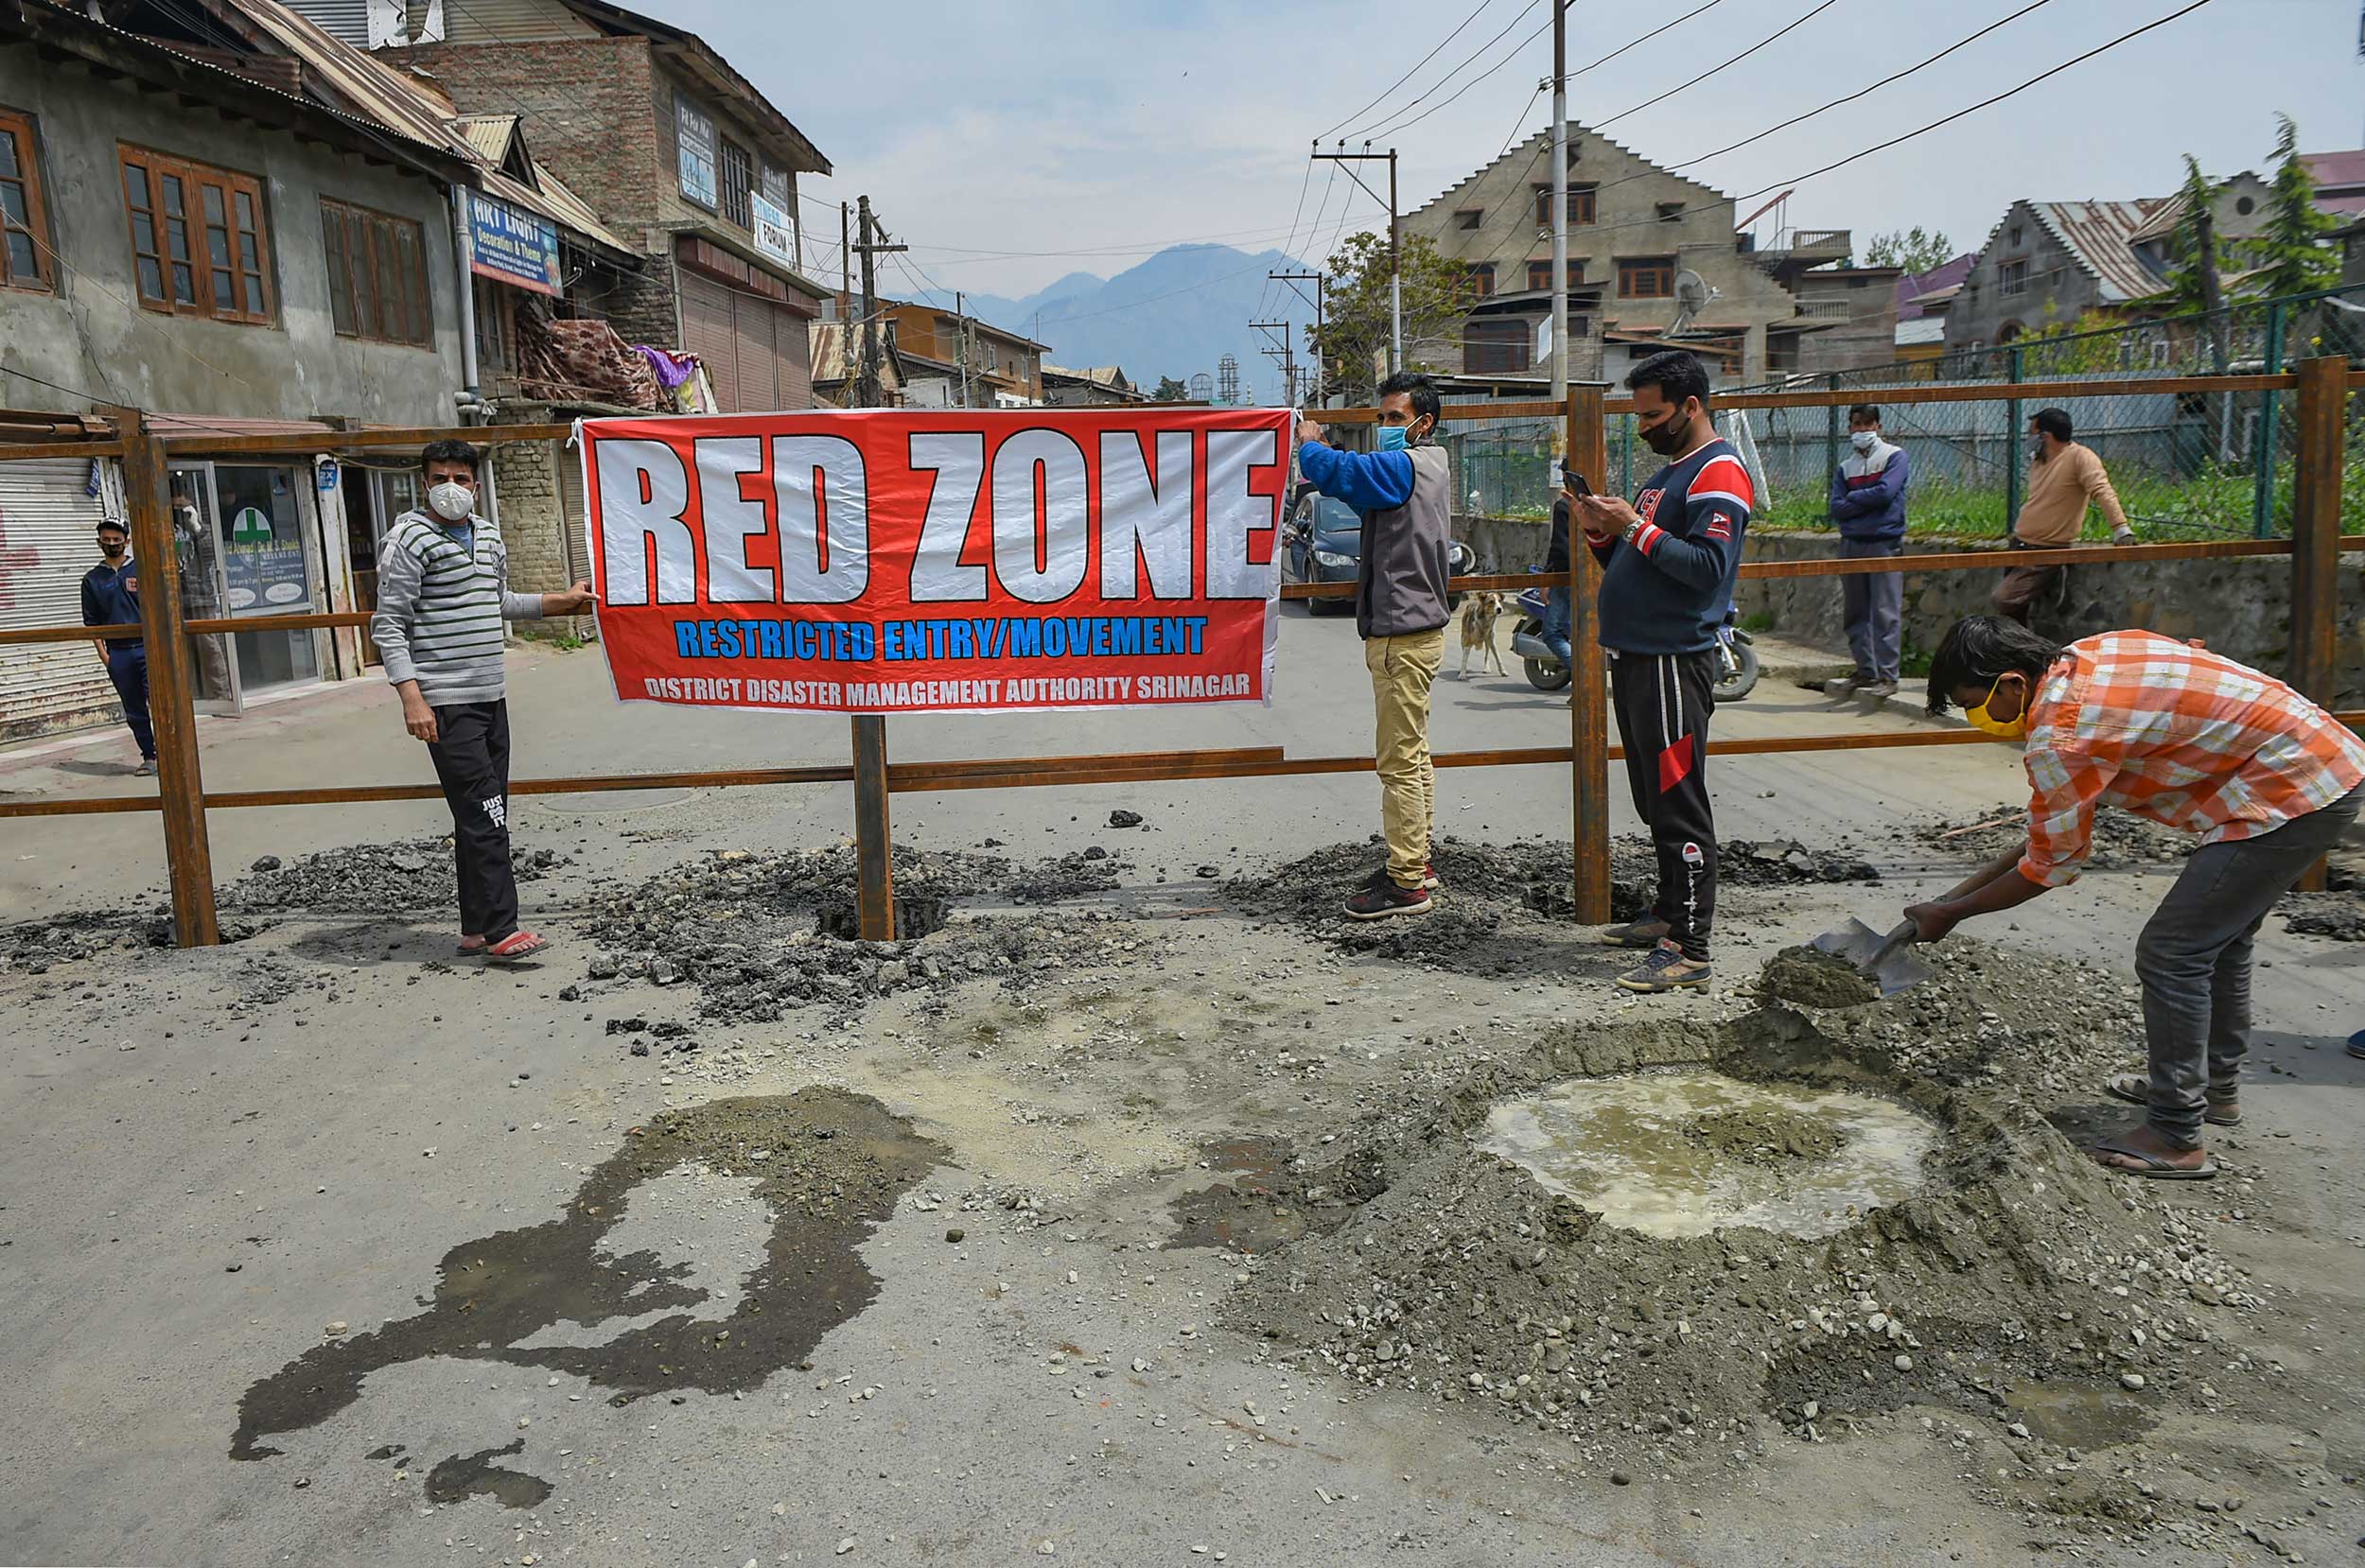 Workers place a banner after setting up a road blockade at a Covid-19 red zone area in Srinagar on Tuesday.